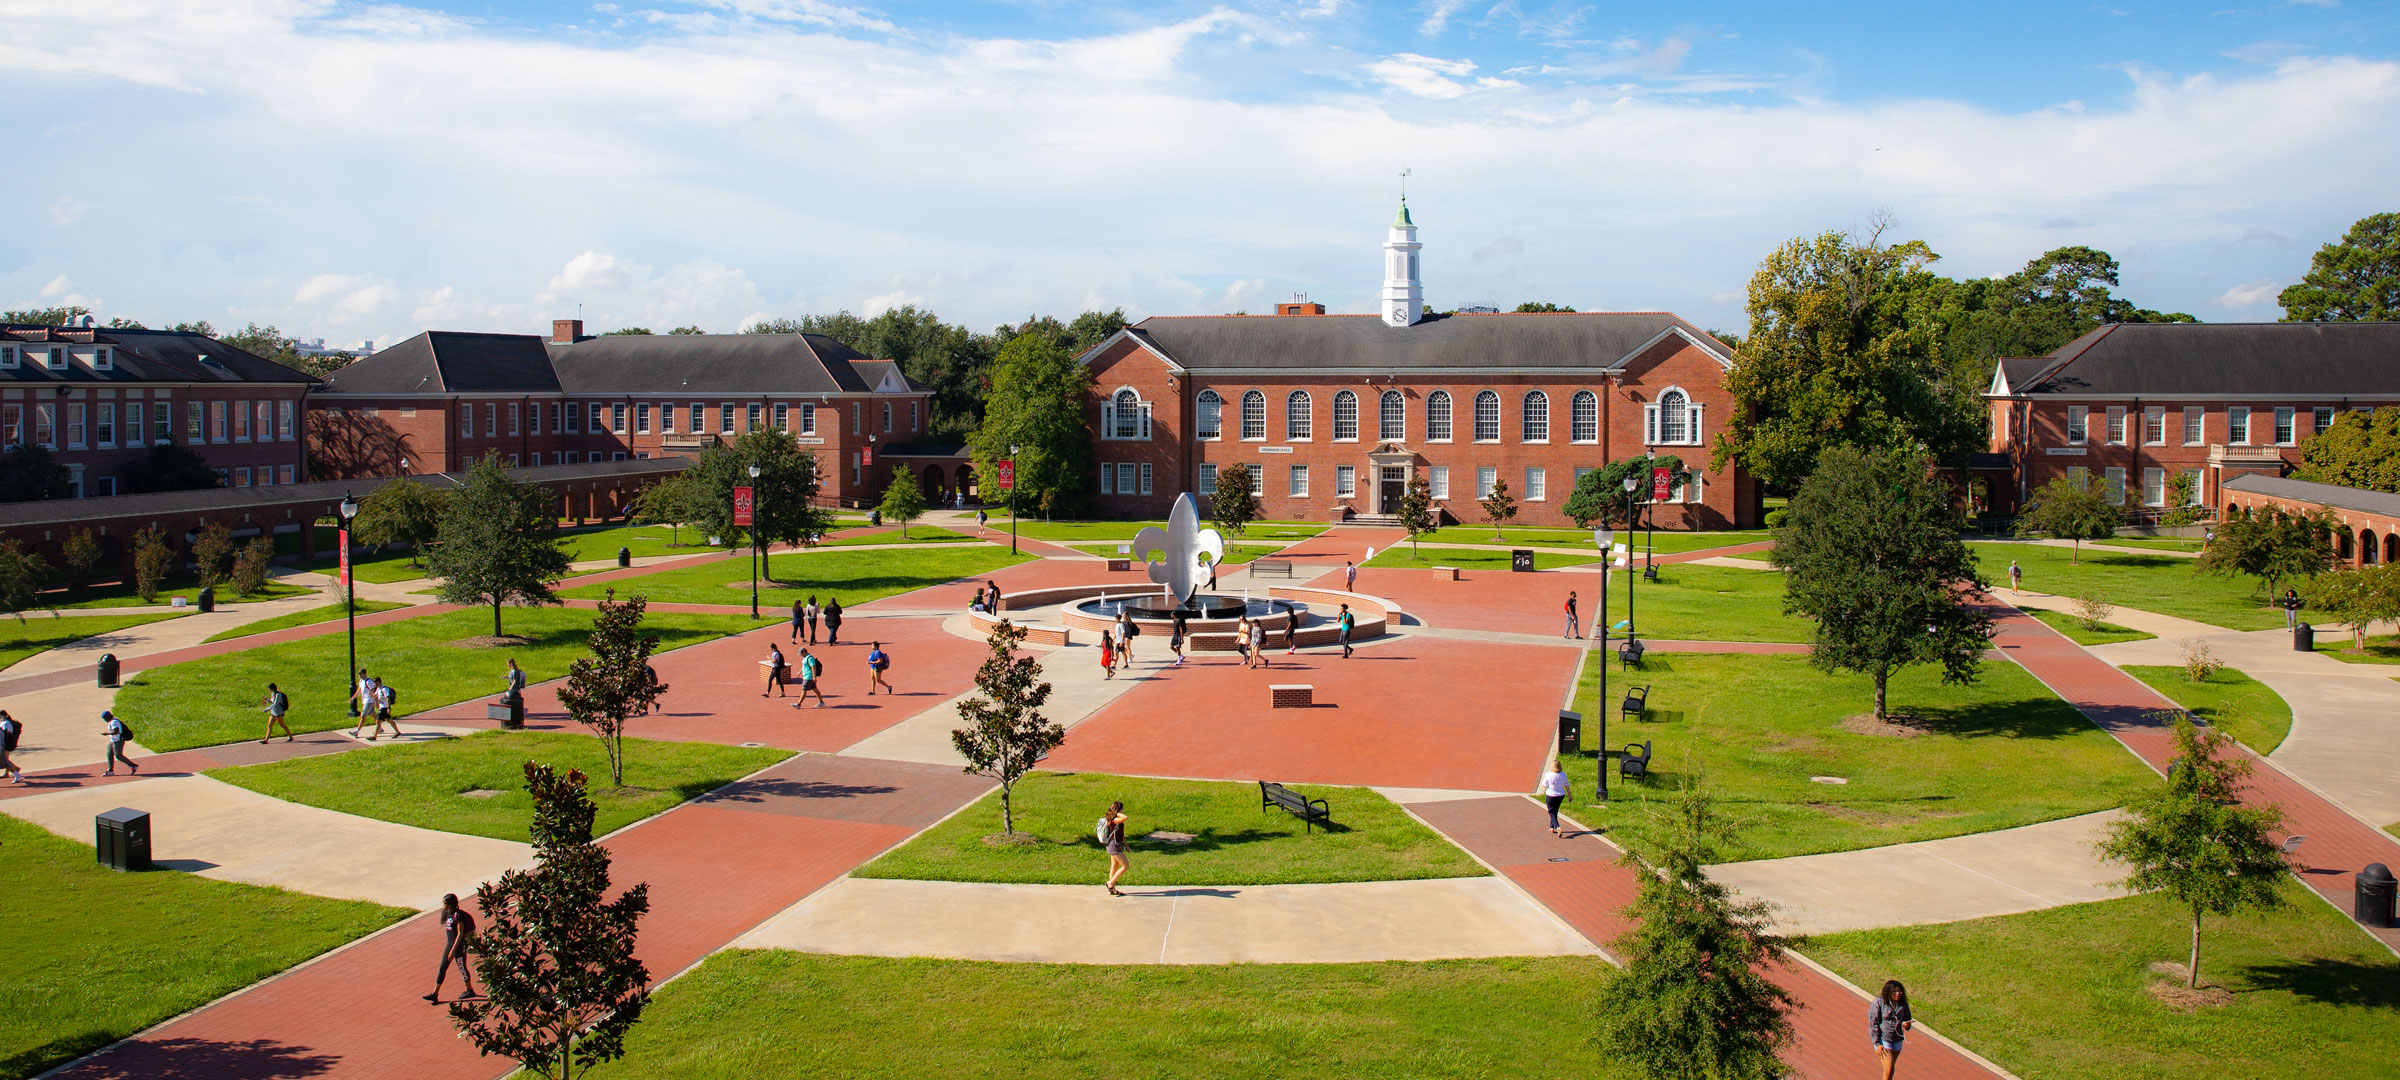 Aerial view of the University of Louisiana at Lafayette Quad with the fleur de lis statue and sidewalks